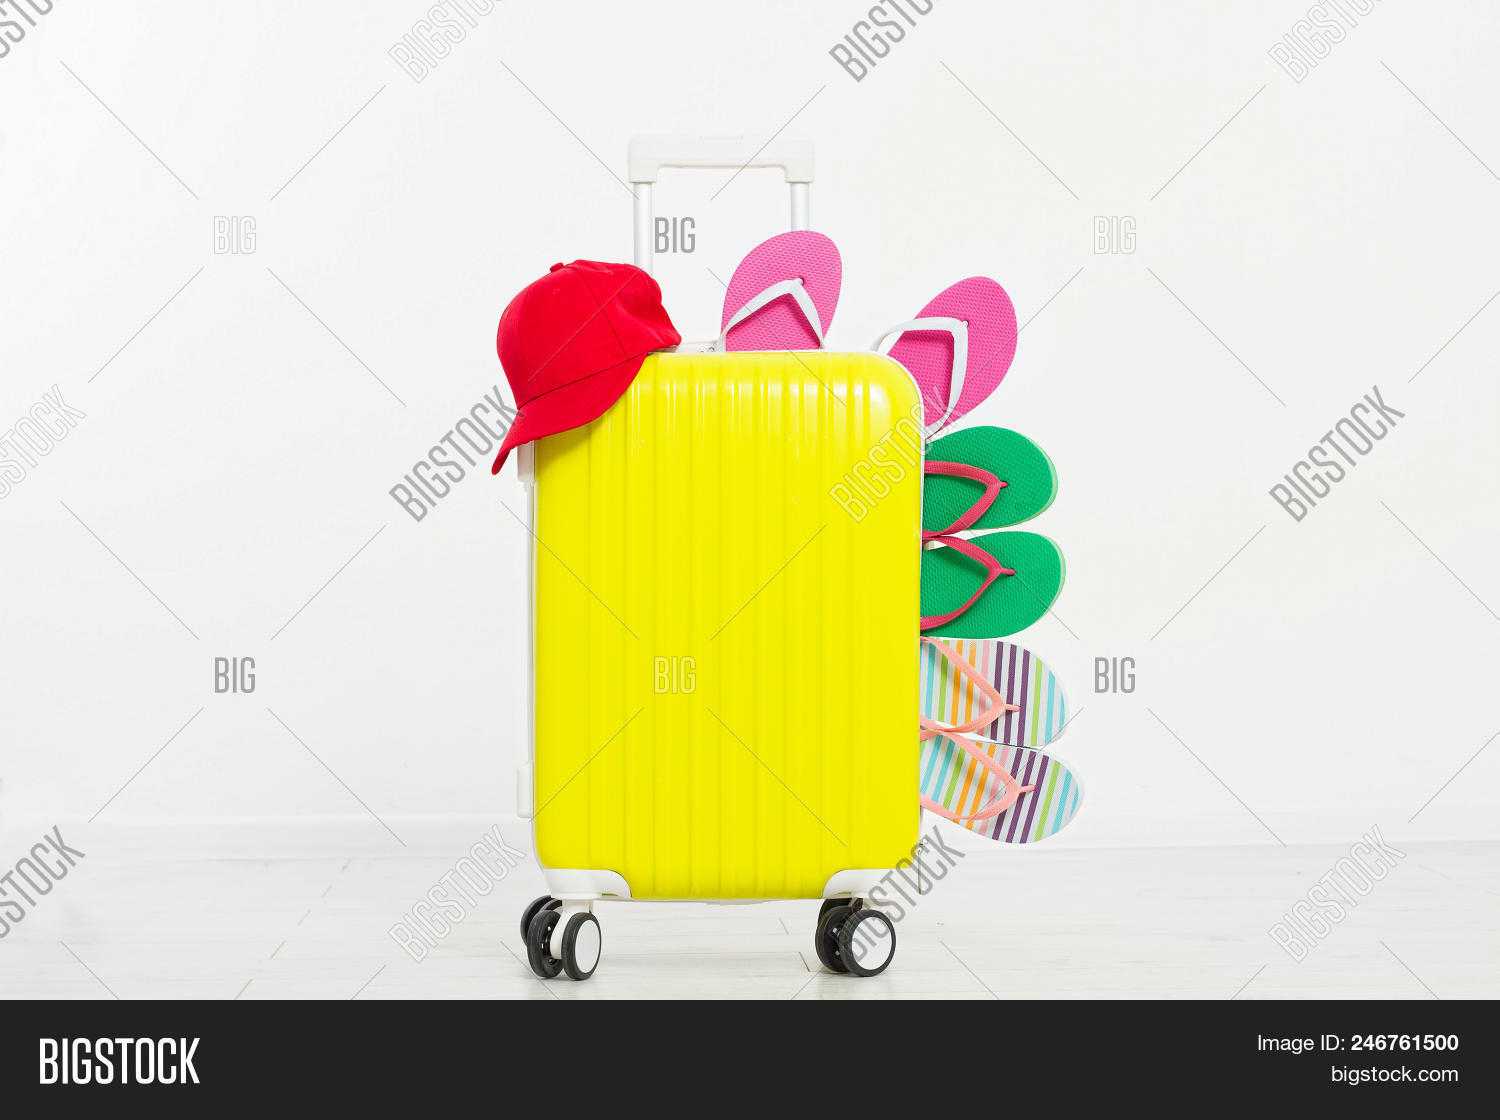 Suitcase Isolated On Image & Photo (Free Trial) | Bigstock For Blank Suitcase Template